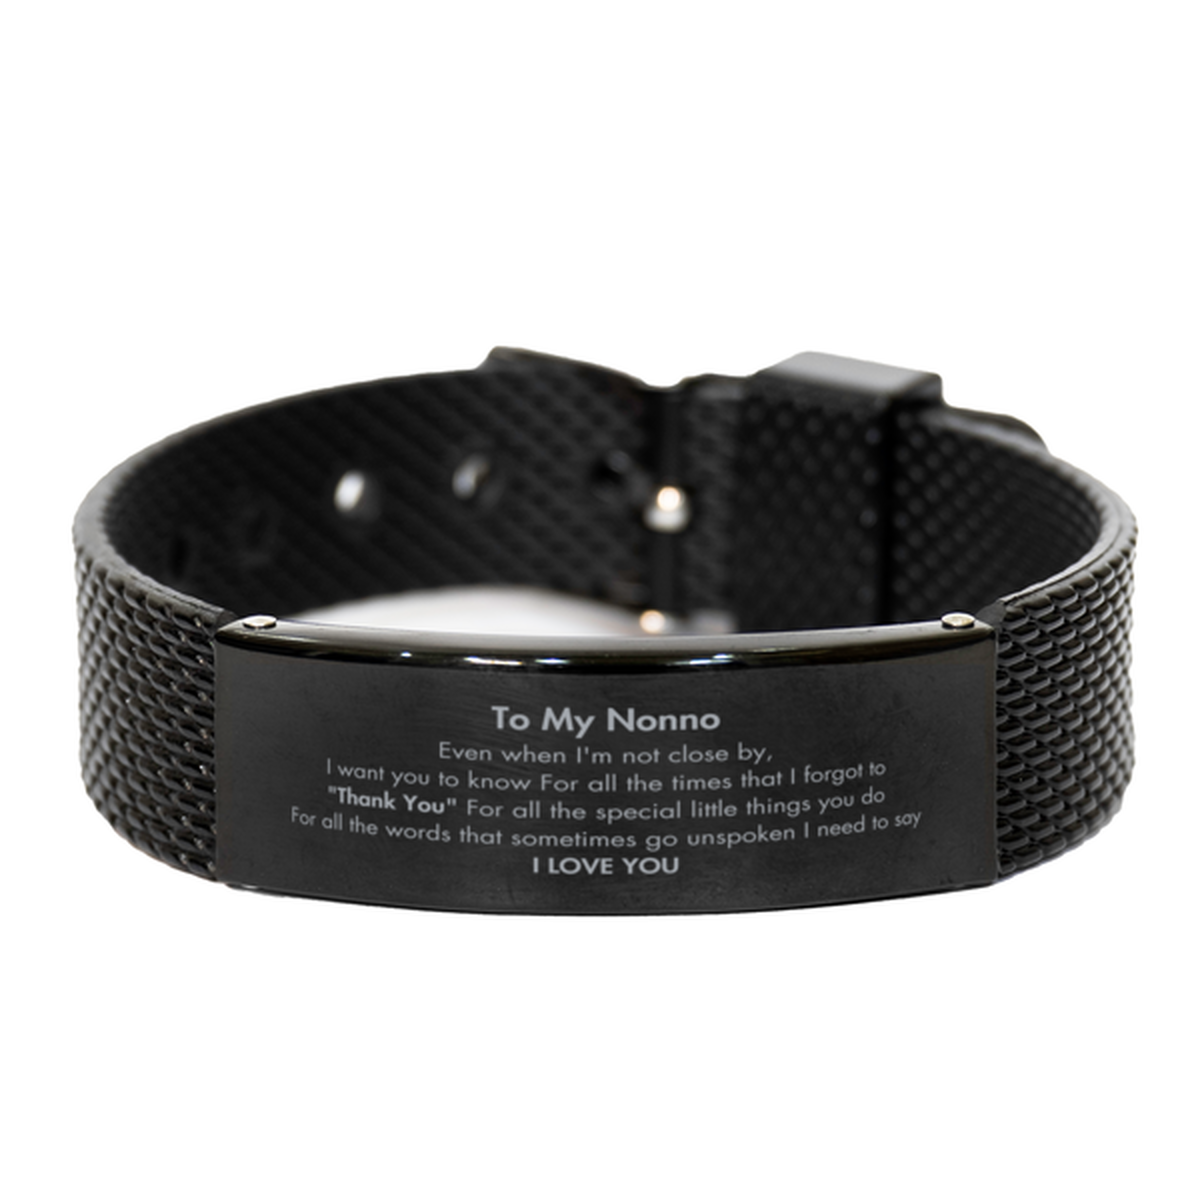 Thank You Gifts for Nonno, Keepsake Black Shark Mesh Bracelet Gifts for Nonno Birthday Mother's day Father's Day Nonno For all the words That sometimes go unspoken I need to say I LOVE YOU